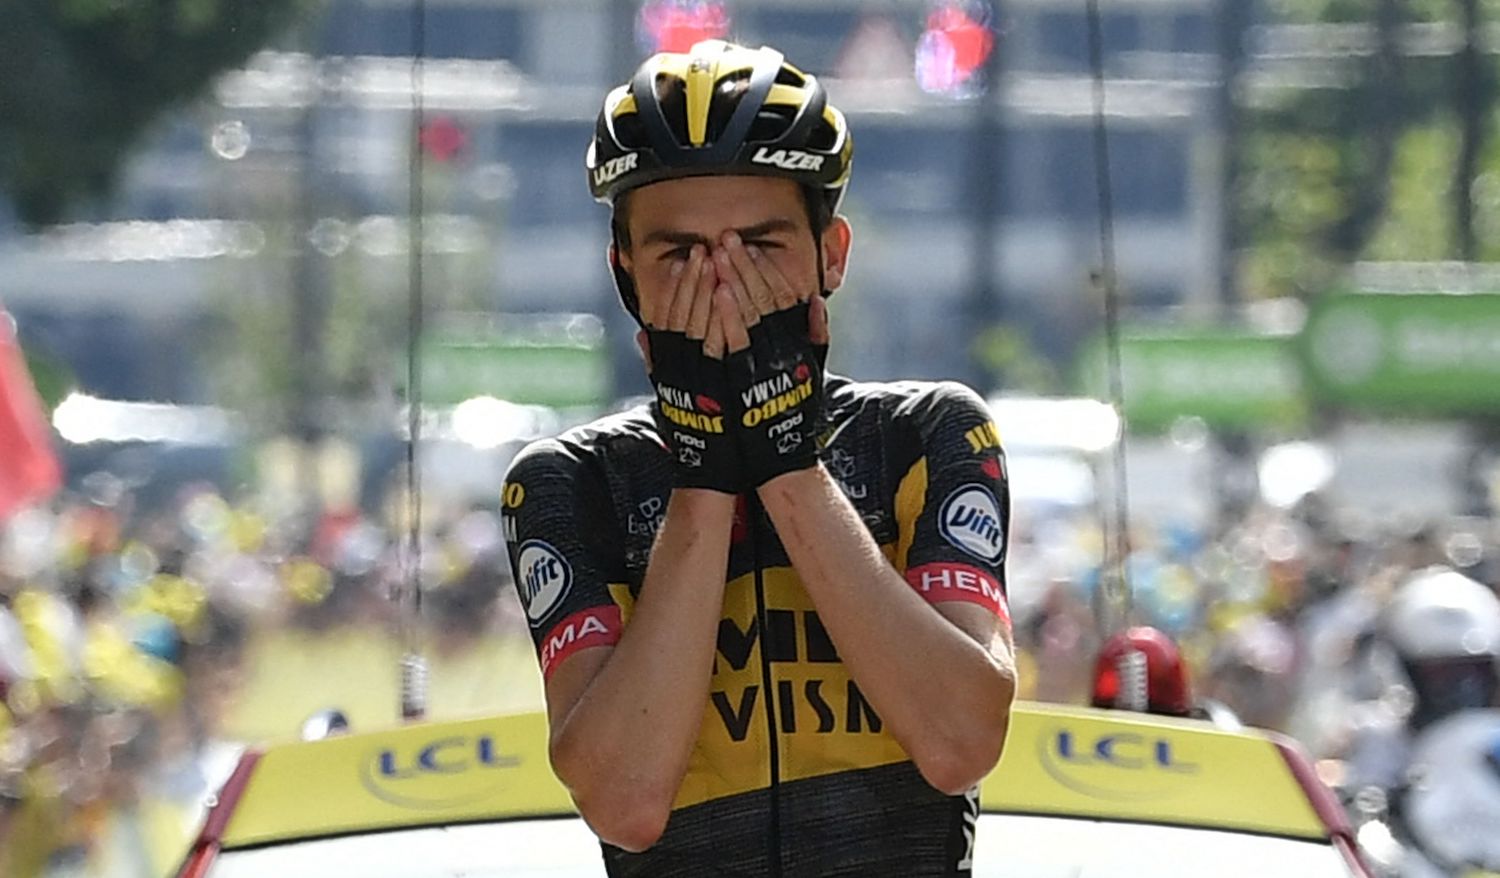 TOPSHOT - Team Jumbo Visma's Sepp Kuss of US celebrates as he crosses the finish line of the 15th stage of the 108th edition of the Tour de France cycling race, 191 km between Ceret and Andorre-La-Vieille, on July 11, 2021. (Photo by Philippe LOPEZ / AFP) (Photo by PHILIPPE LOPEZ/AFP via Getty Images)